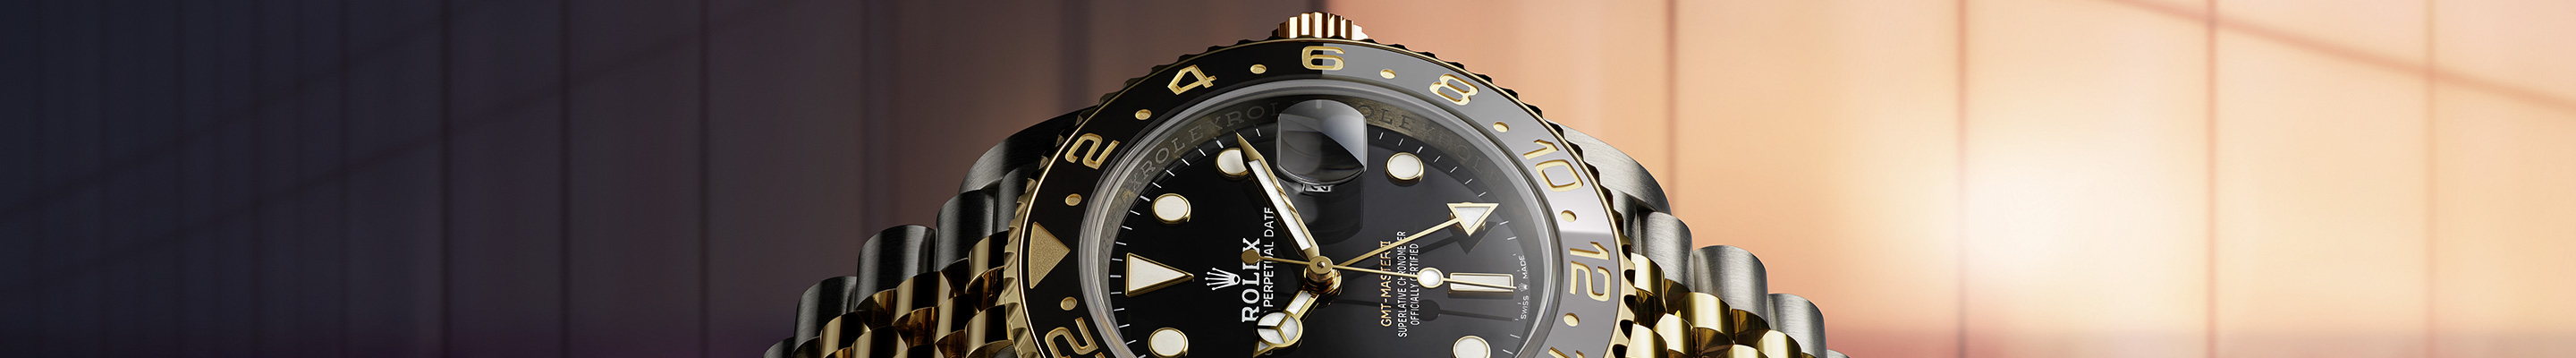 Our Rolex GMT-Master II Watches